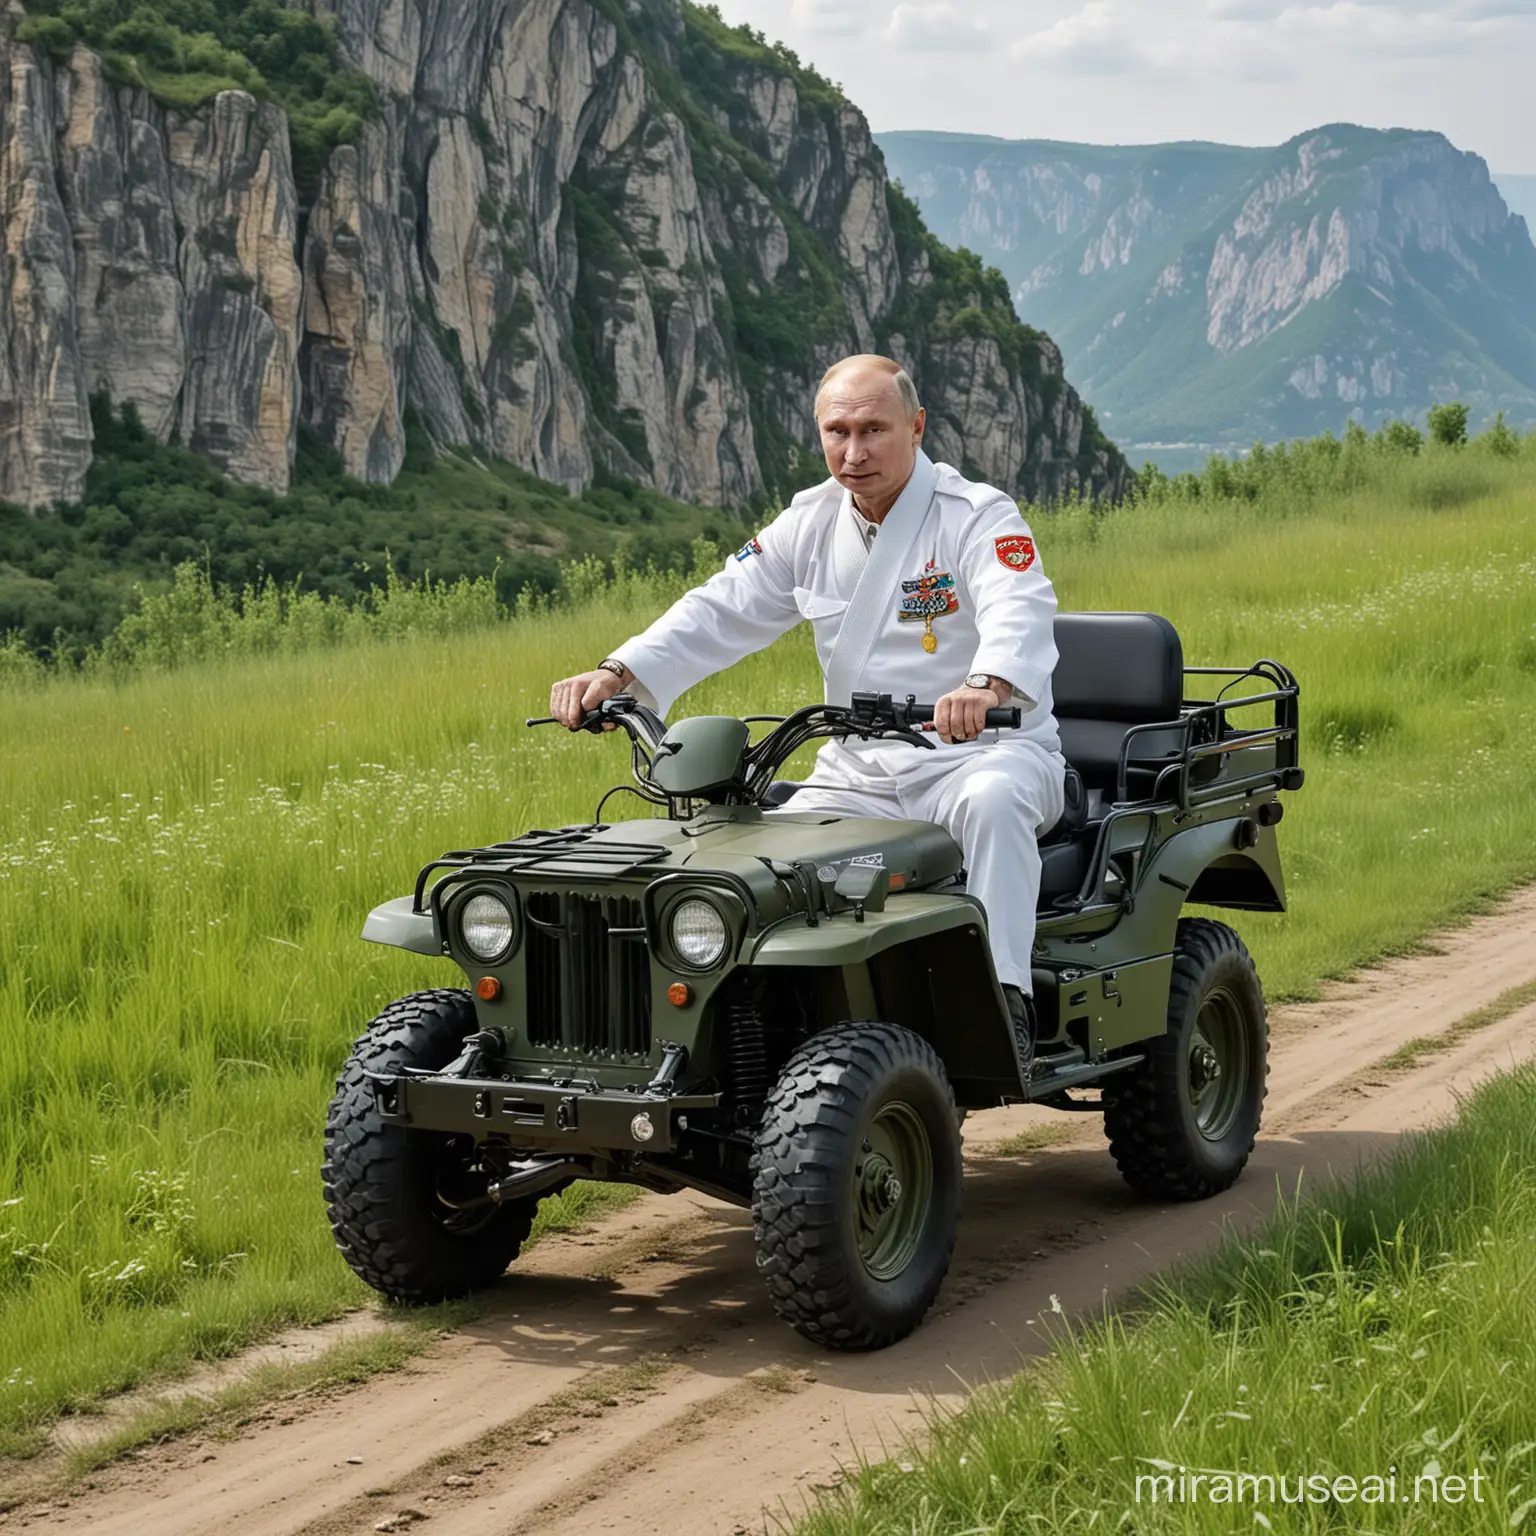  65years old real face putin  wear white  Judo attire  driving white Harry Davidson motorcycle ，on higer green grass 300meters  sharp cliff ,real face ukrain Zelensky driving us green 50 years old willys jeep with firing machinegun to chace former putin ,8k,